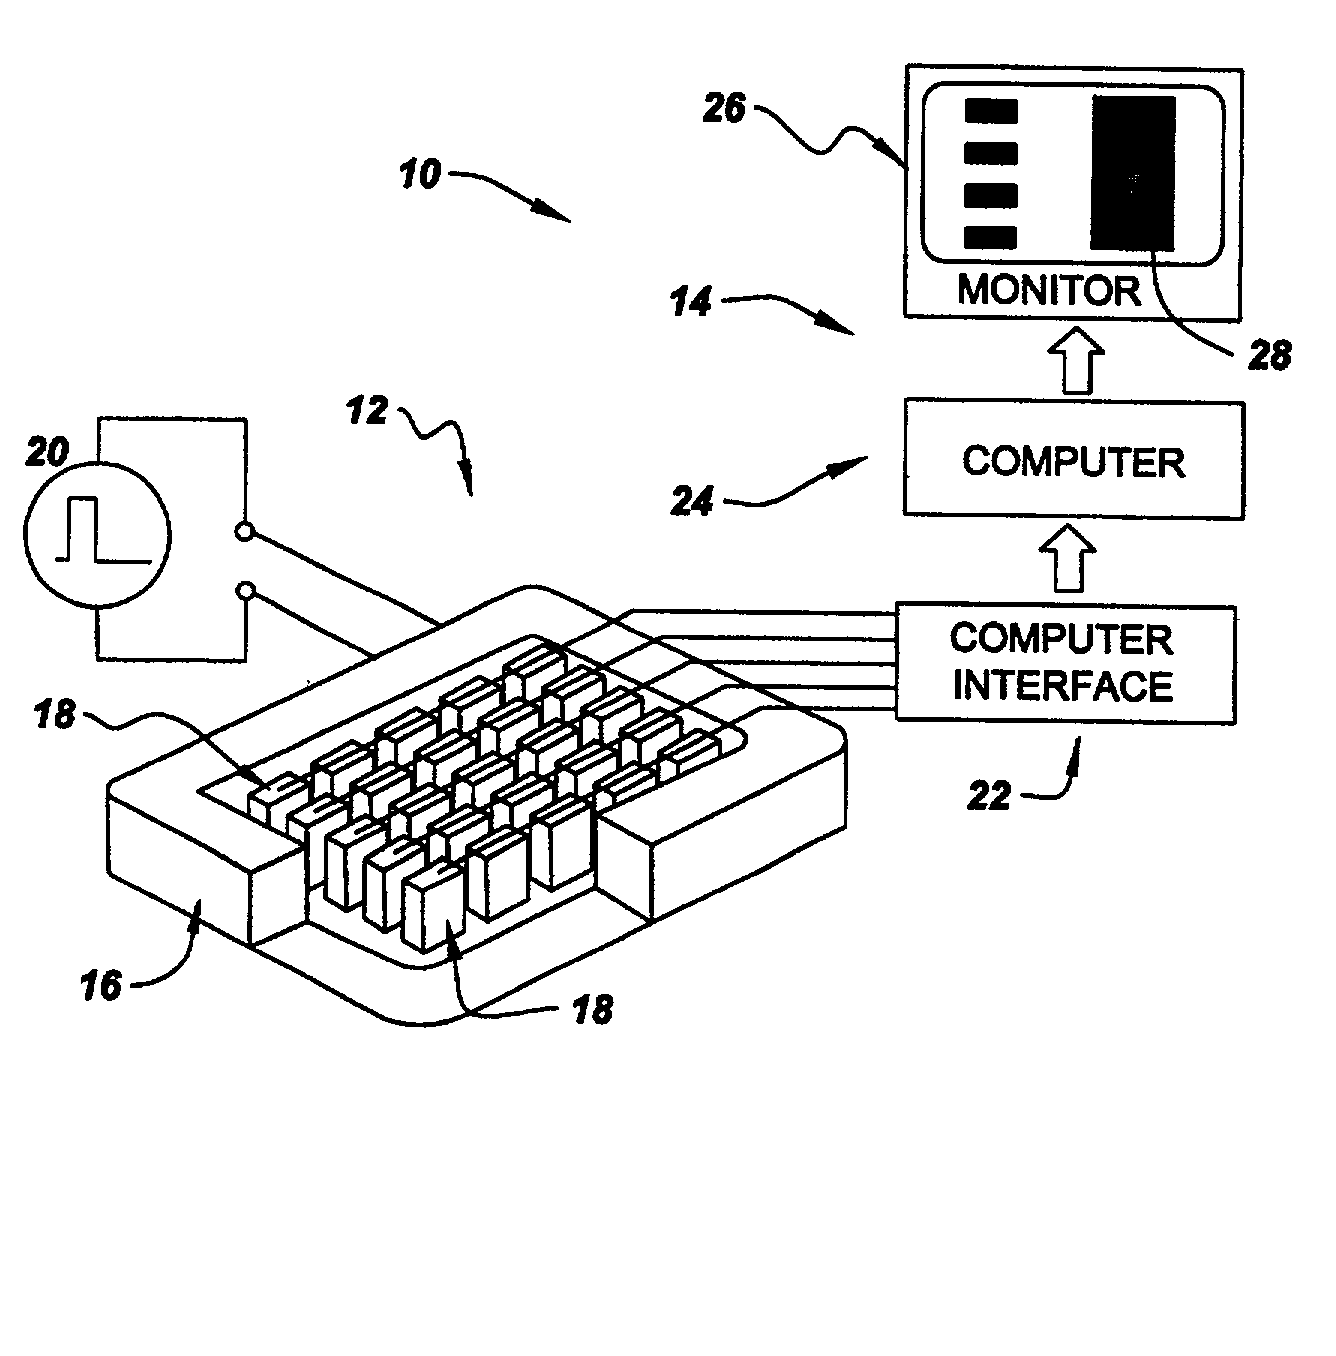 Pulsed eddy current two-dimensional sensor array inspection probe and system